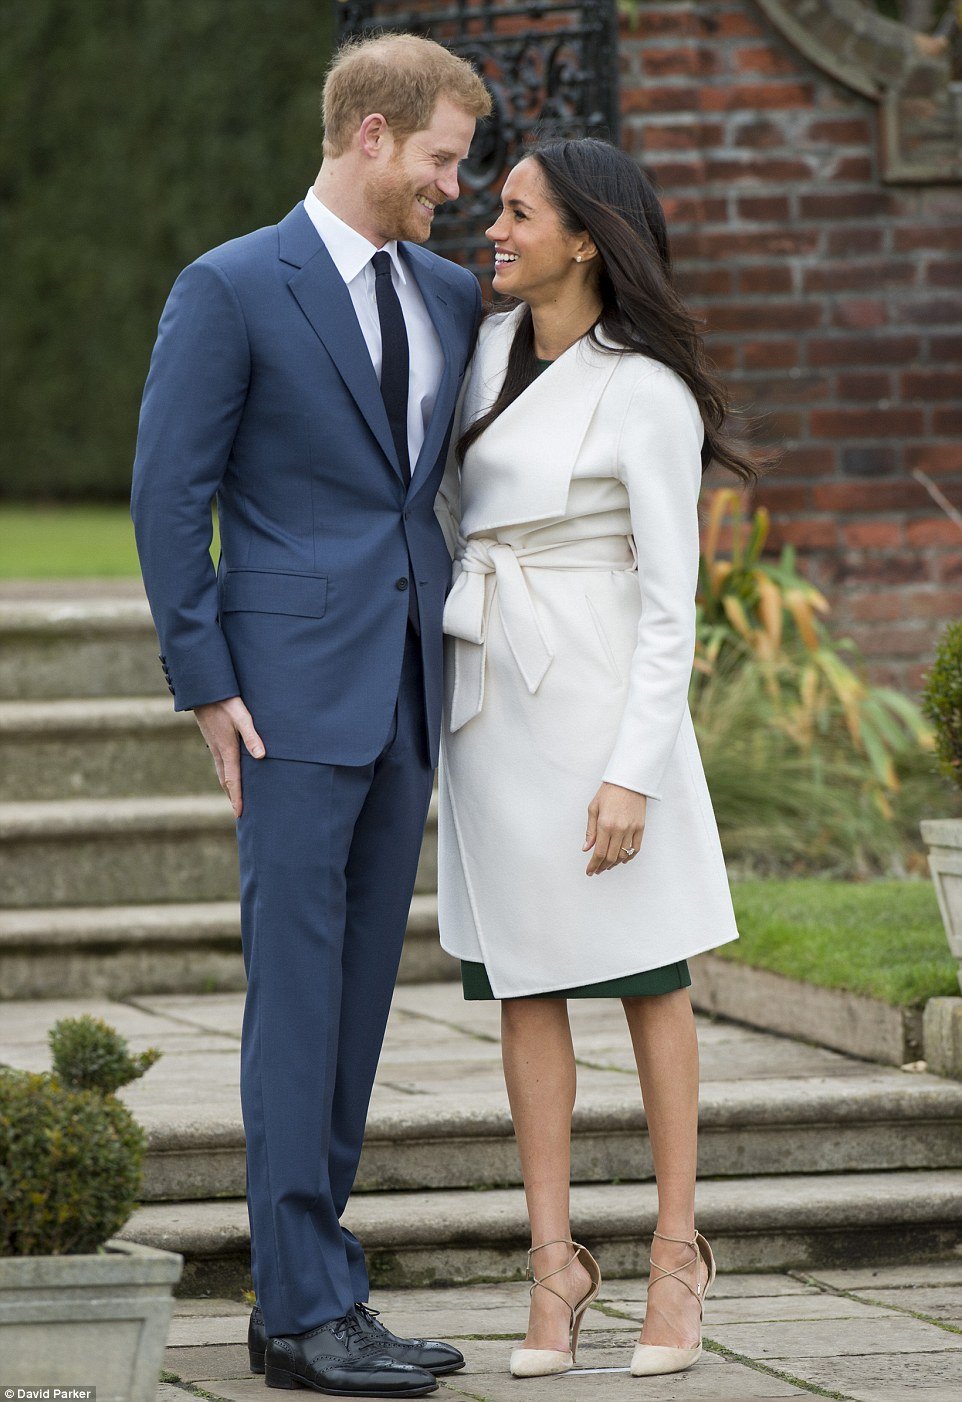 Websites crashed as fashionistas around the globe scrambled to emulate Ms Markle's look today. Her white coat was by Canadian brand Line the Label while show wore Aquazzura Matilde Crisscross Nude Suede Pumps